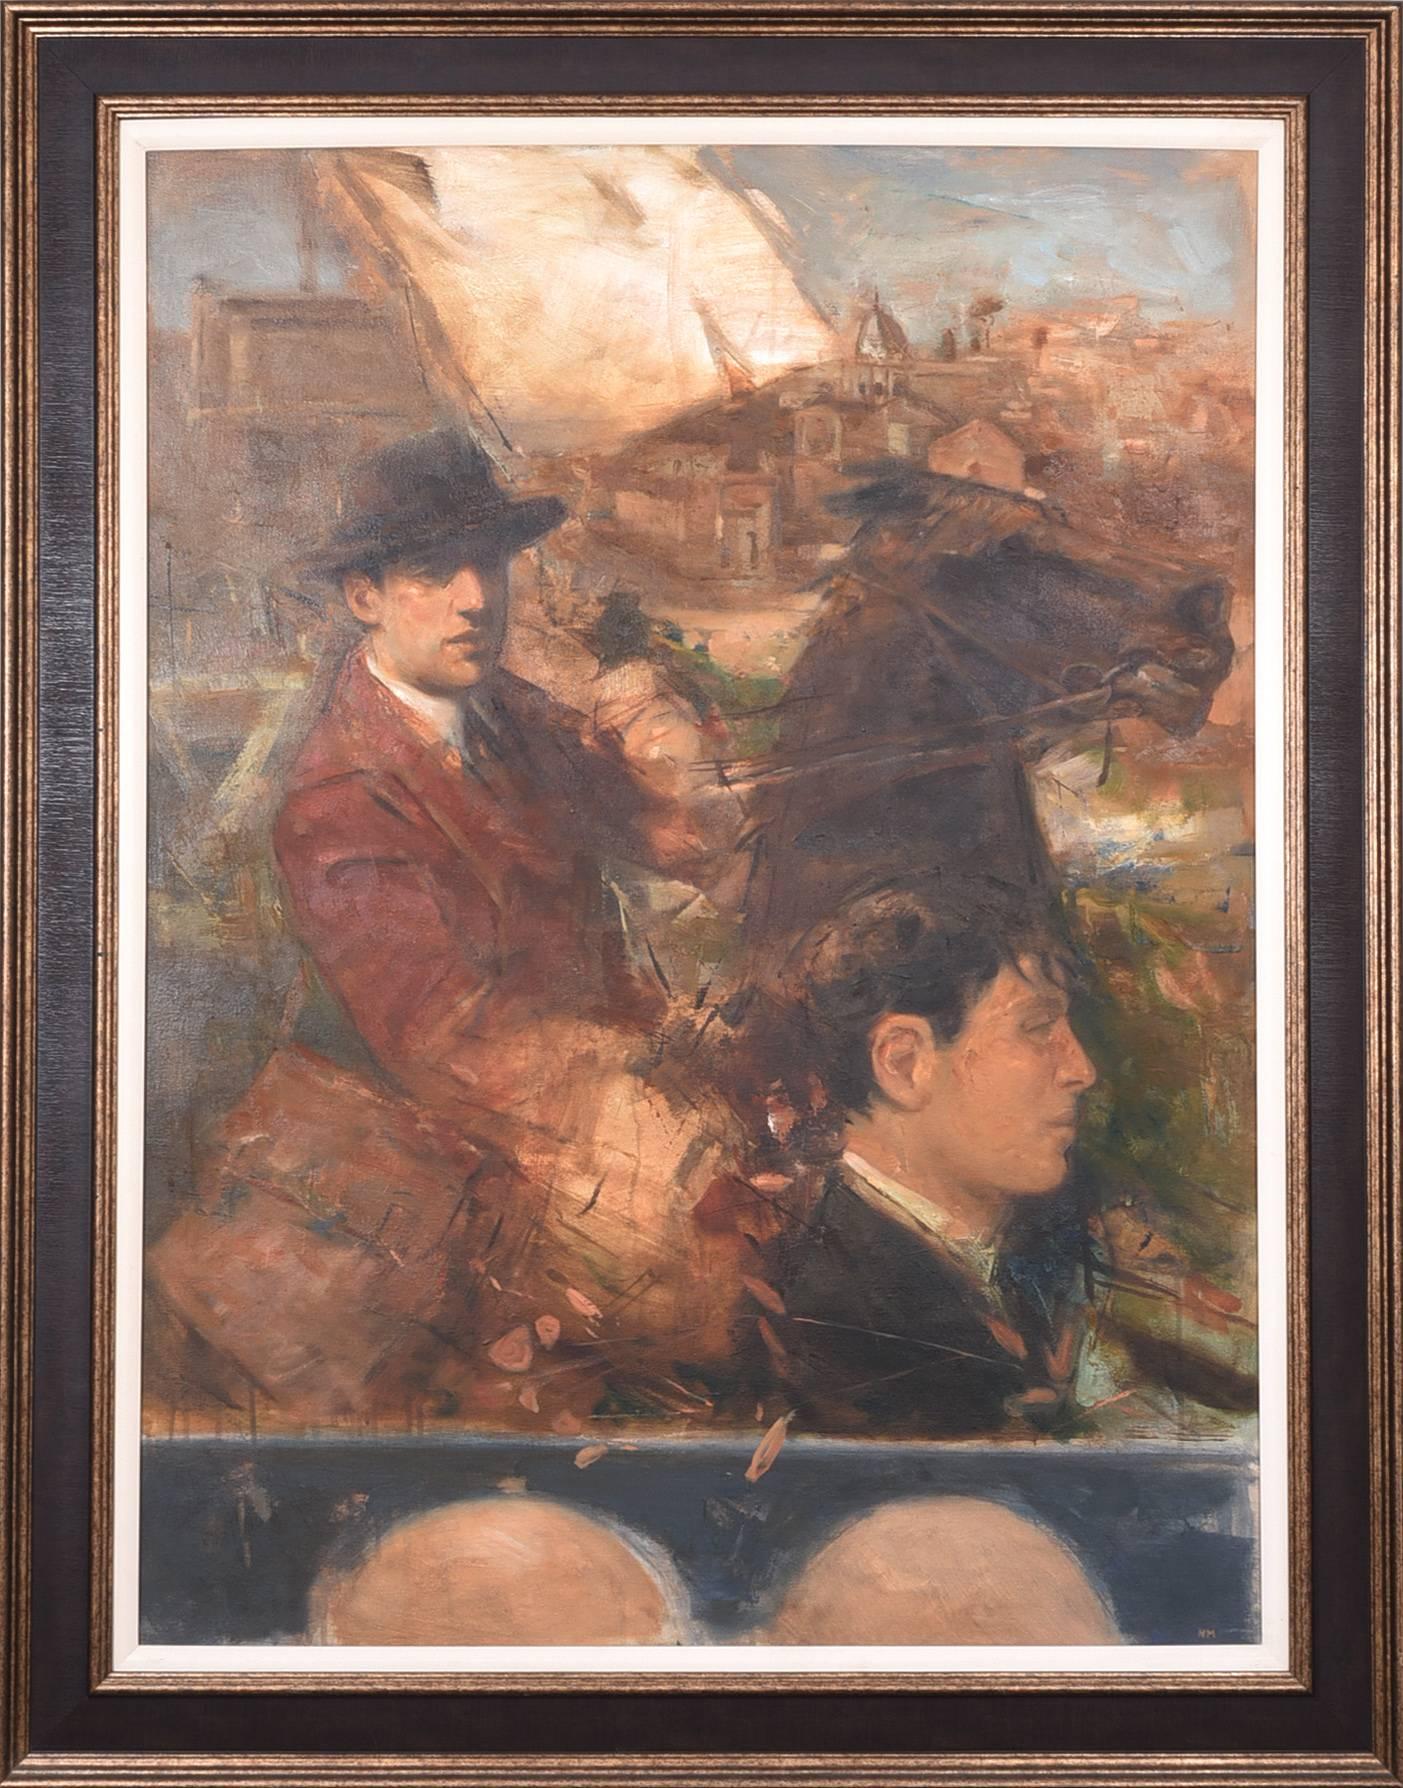 Oil on canvas
Signed in Mono
Framed
Measure: 40 x 30 inches (47 x 37 inches framed)

W.B Yeats depicted in the foreground of the picture. 

The Easter Rising also known as the Easter Rebellion, was an armed insurrection in Ireland during